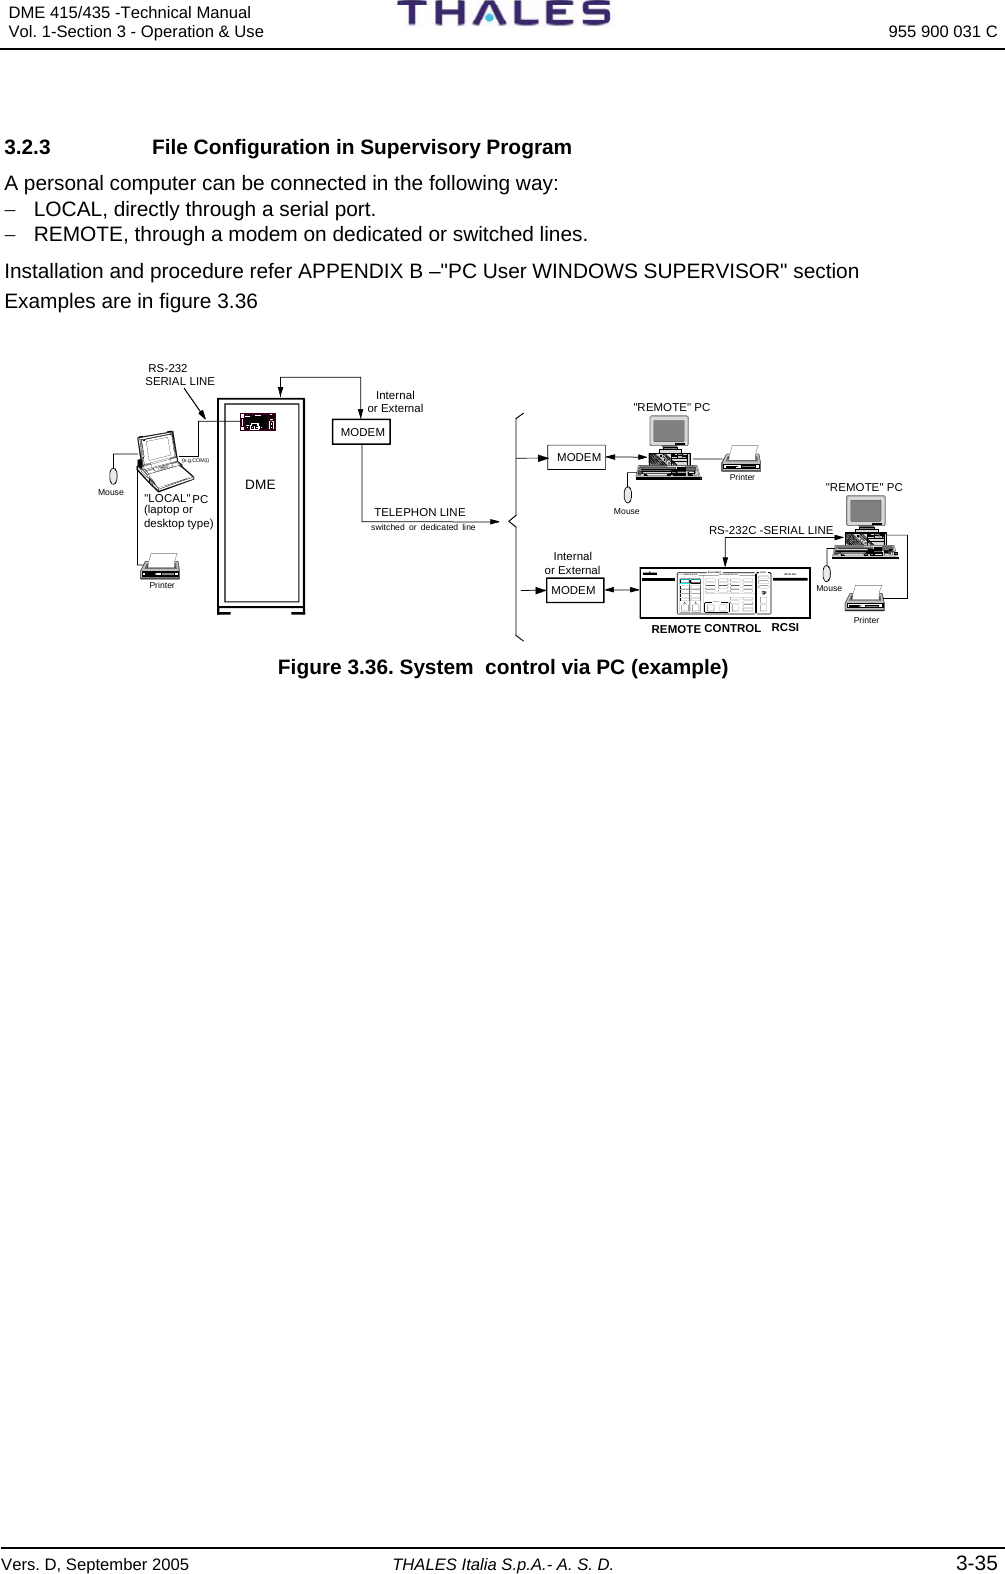 DME 415/435 -Technical Manual  Vol. 1-Section 3 - Operation &amp; Use   955 900 031 C Vers. D, September 2005 THALES Italia S.p.A.- A. S. D. 3-35  3.2.3  File Configuration in Supervisory Program A personal computer can be connected in the following way: −  LOCAL, directly through a serial port. −  REMOTE, through a modem on dedicated or switched lines. Installation and procedure refer APPENDIX B –&quot;PC User WINDOWS SUPERVISOR&quot; section Examples are in figure 3.36   RS-232SERIAL LINE&quot;REMOTE&quot; PC  TELEPHON LINE RCSICONTROLREMOTEInternal or External MODEMMODEM&quot;REMOTE&quot; PC PC &quot;LOCAL&quot;(laptop or desktop type)DME RCSI  446EQUIPMENT RCSI12DETAILED STAT USMAIN STATUSCOMMANDMODEM RS-232C -SERIAL LINEswitched or dedicated lineMousePrinterInternal or External MouseMousePrinterPrinter(e.g.COM1) Figure 3.36. System  control via PC (example)       